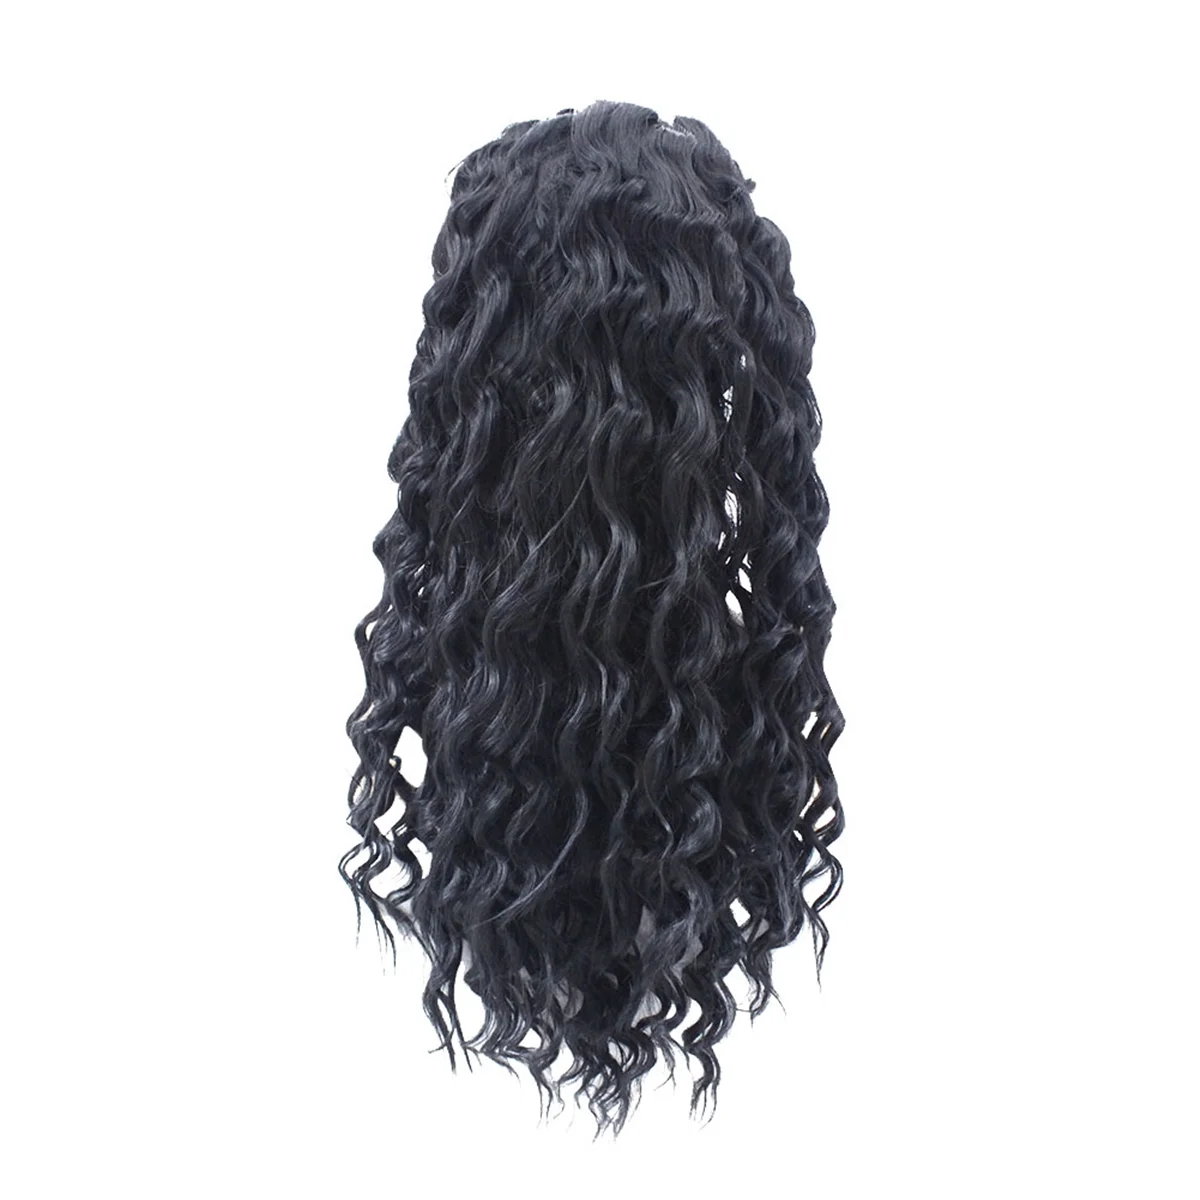 

16 Inches Front Lace Curly Fringe Wig Curly Hair Wigs Brazilian Remy- Curly Human-Hair Wigs for Women